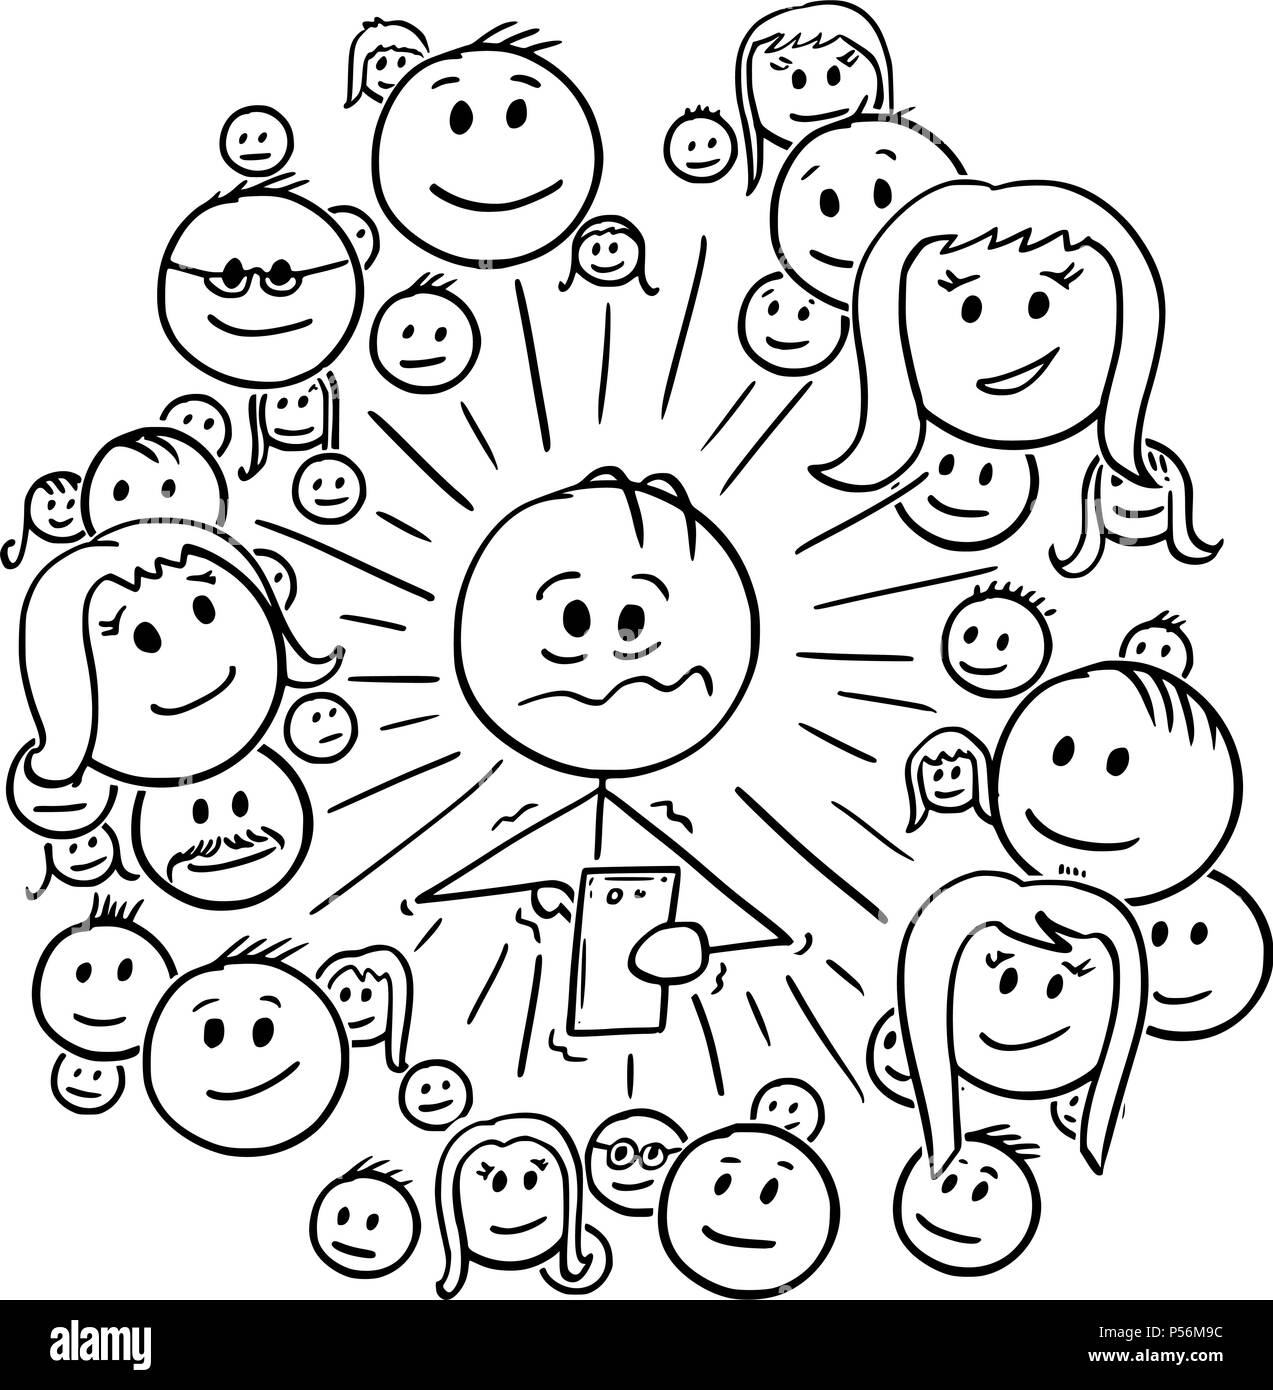 Cartoon of Frustrated Man and His Social Network Connections Stock Vector